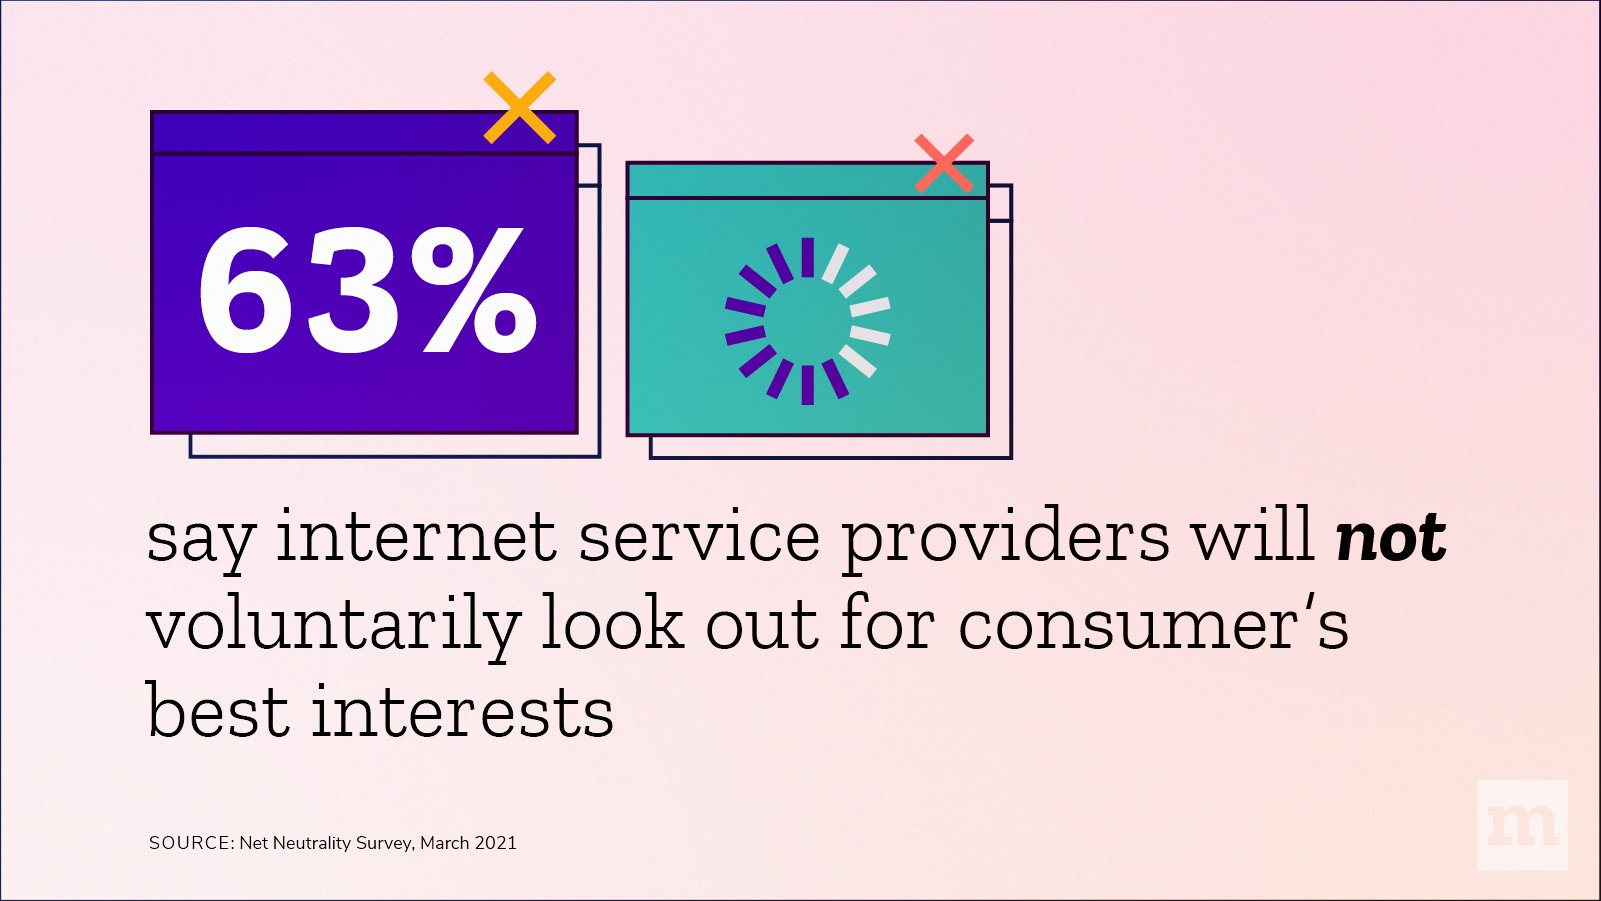 63% say ISPs will NOT voluntarily look out for consumer's best interests